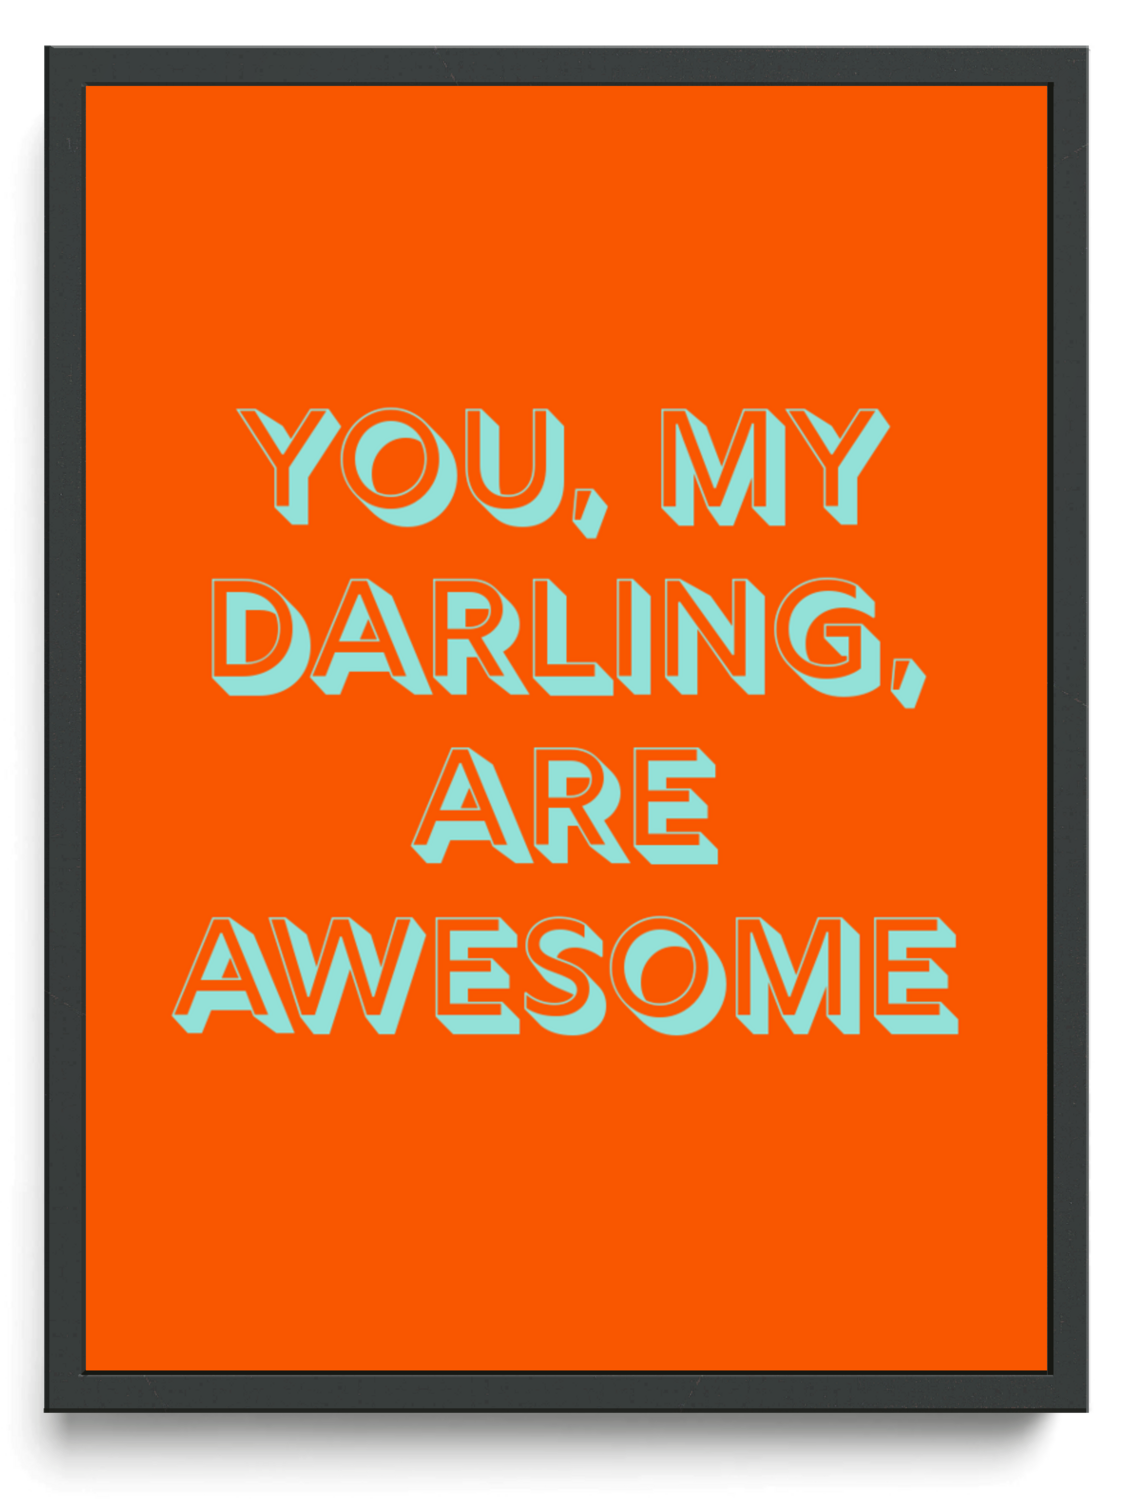 You my darling are awesome framed typographic print